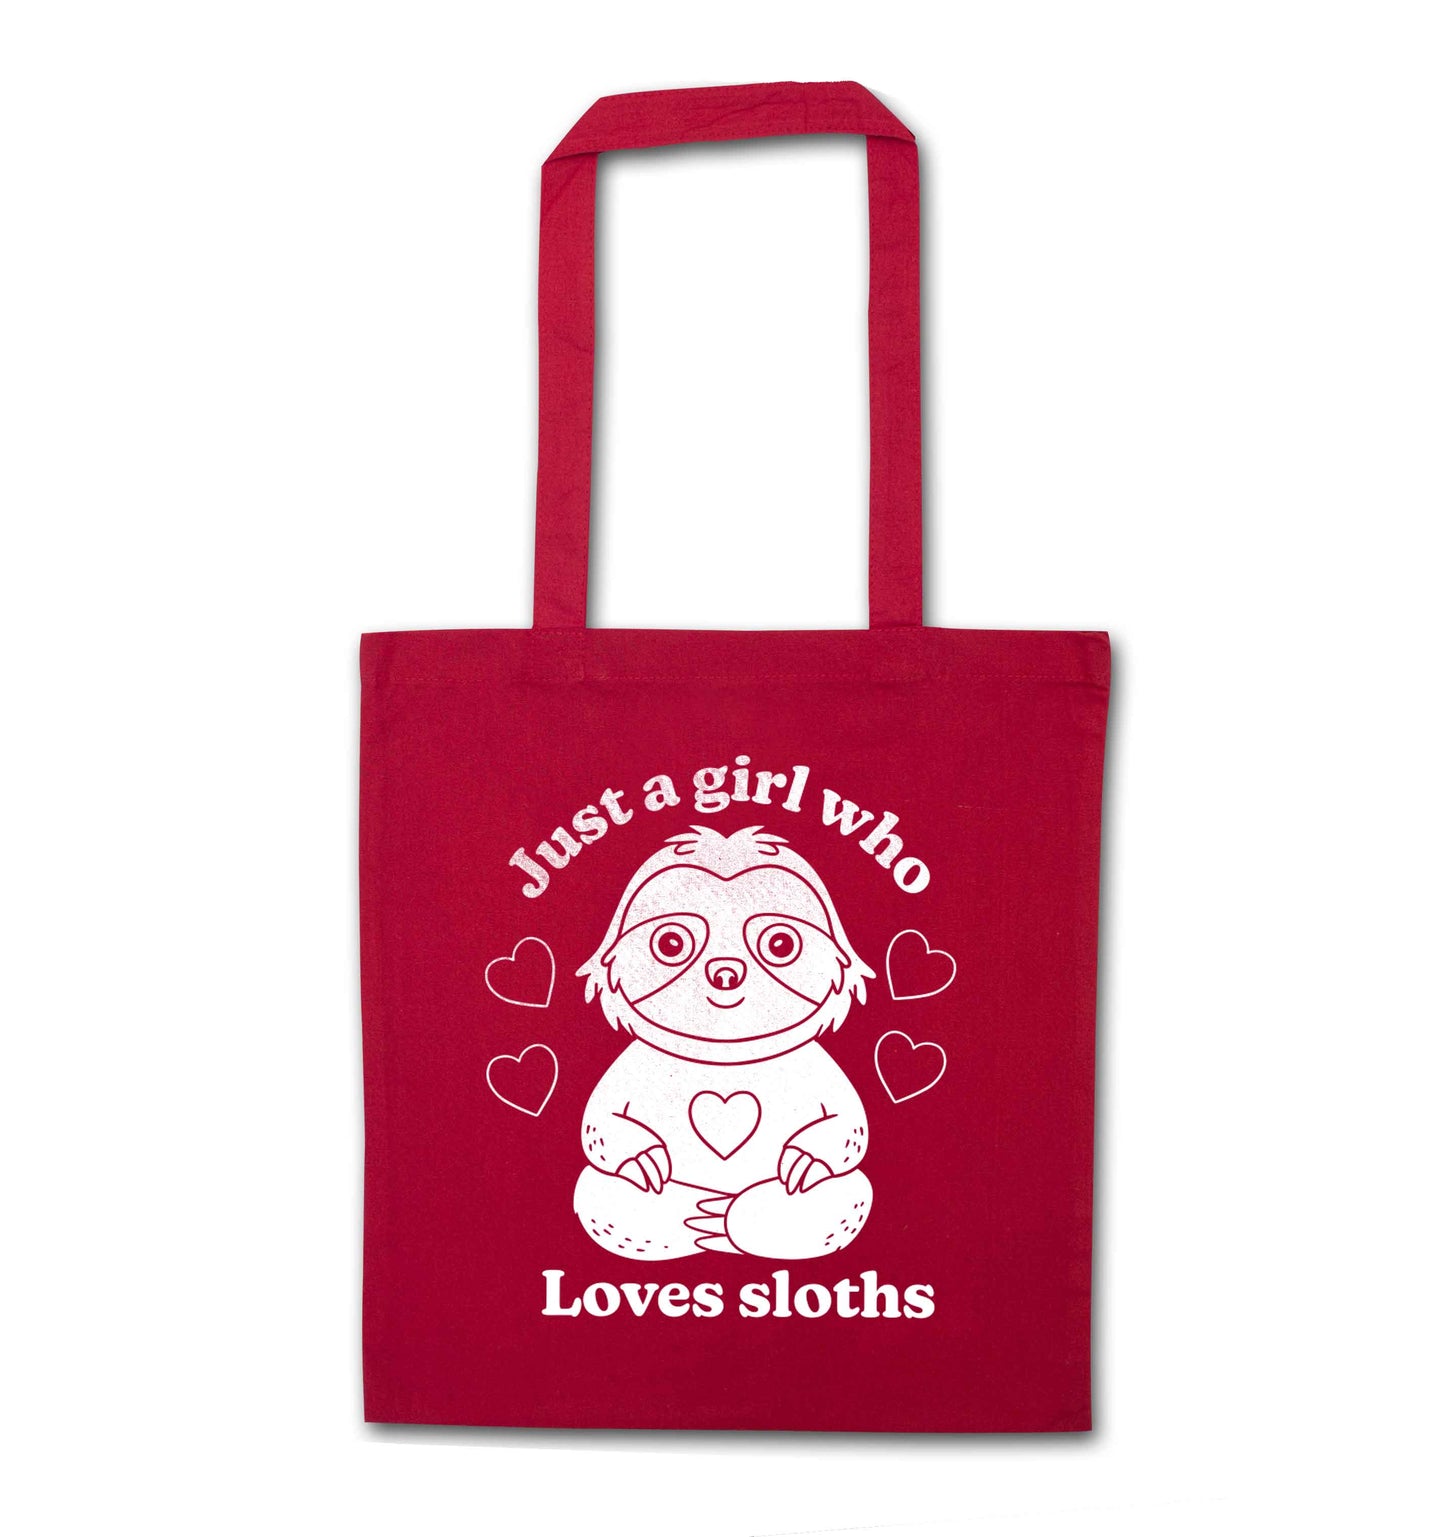 Just a girl who loves sloths red tote bag